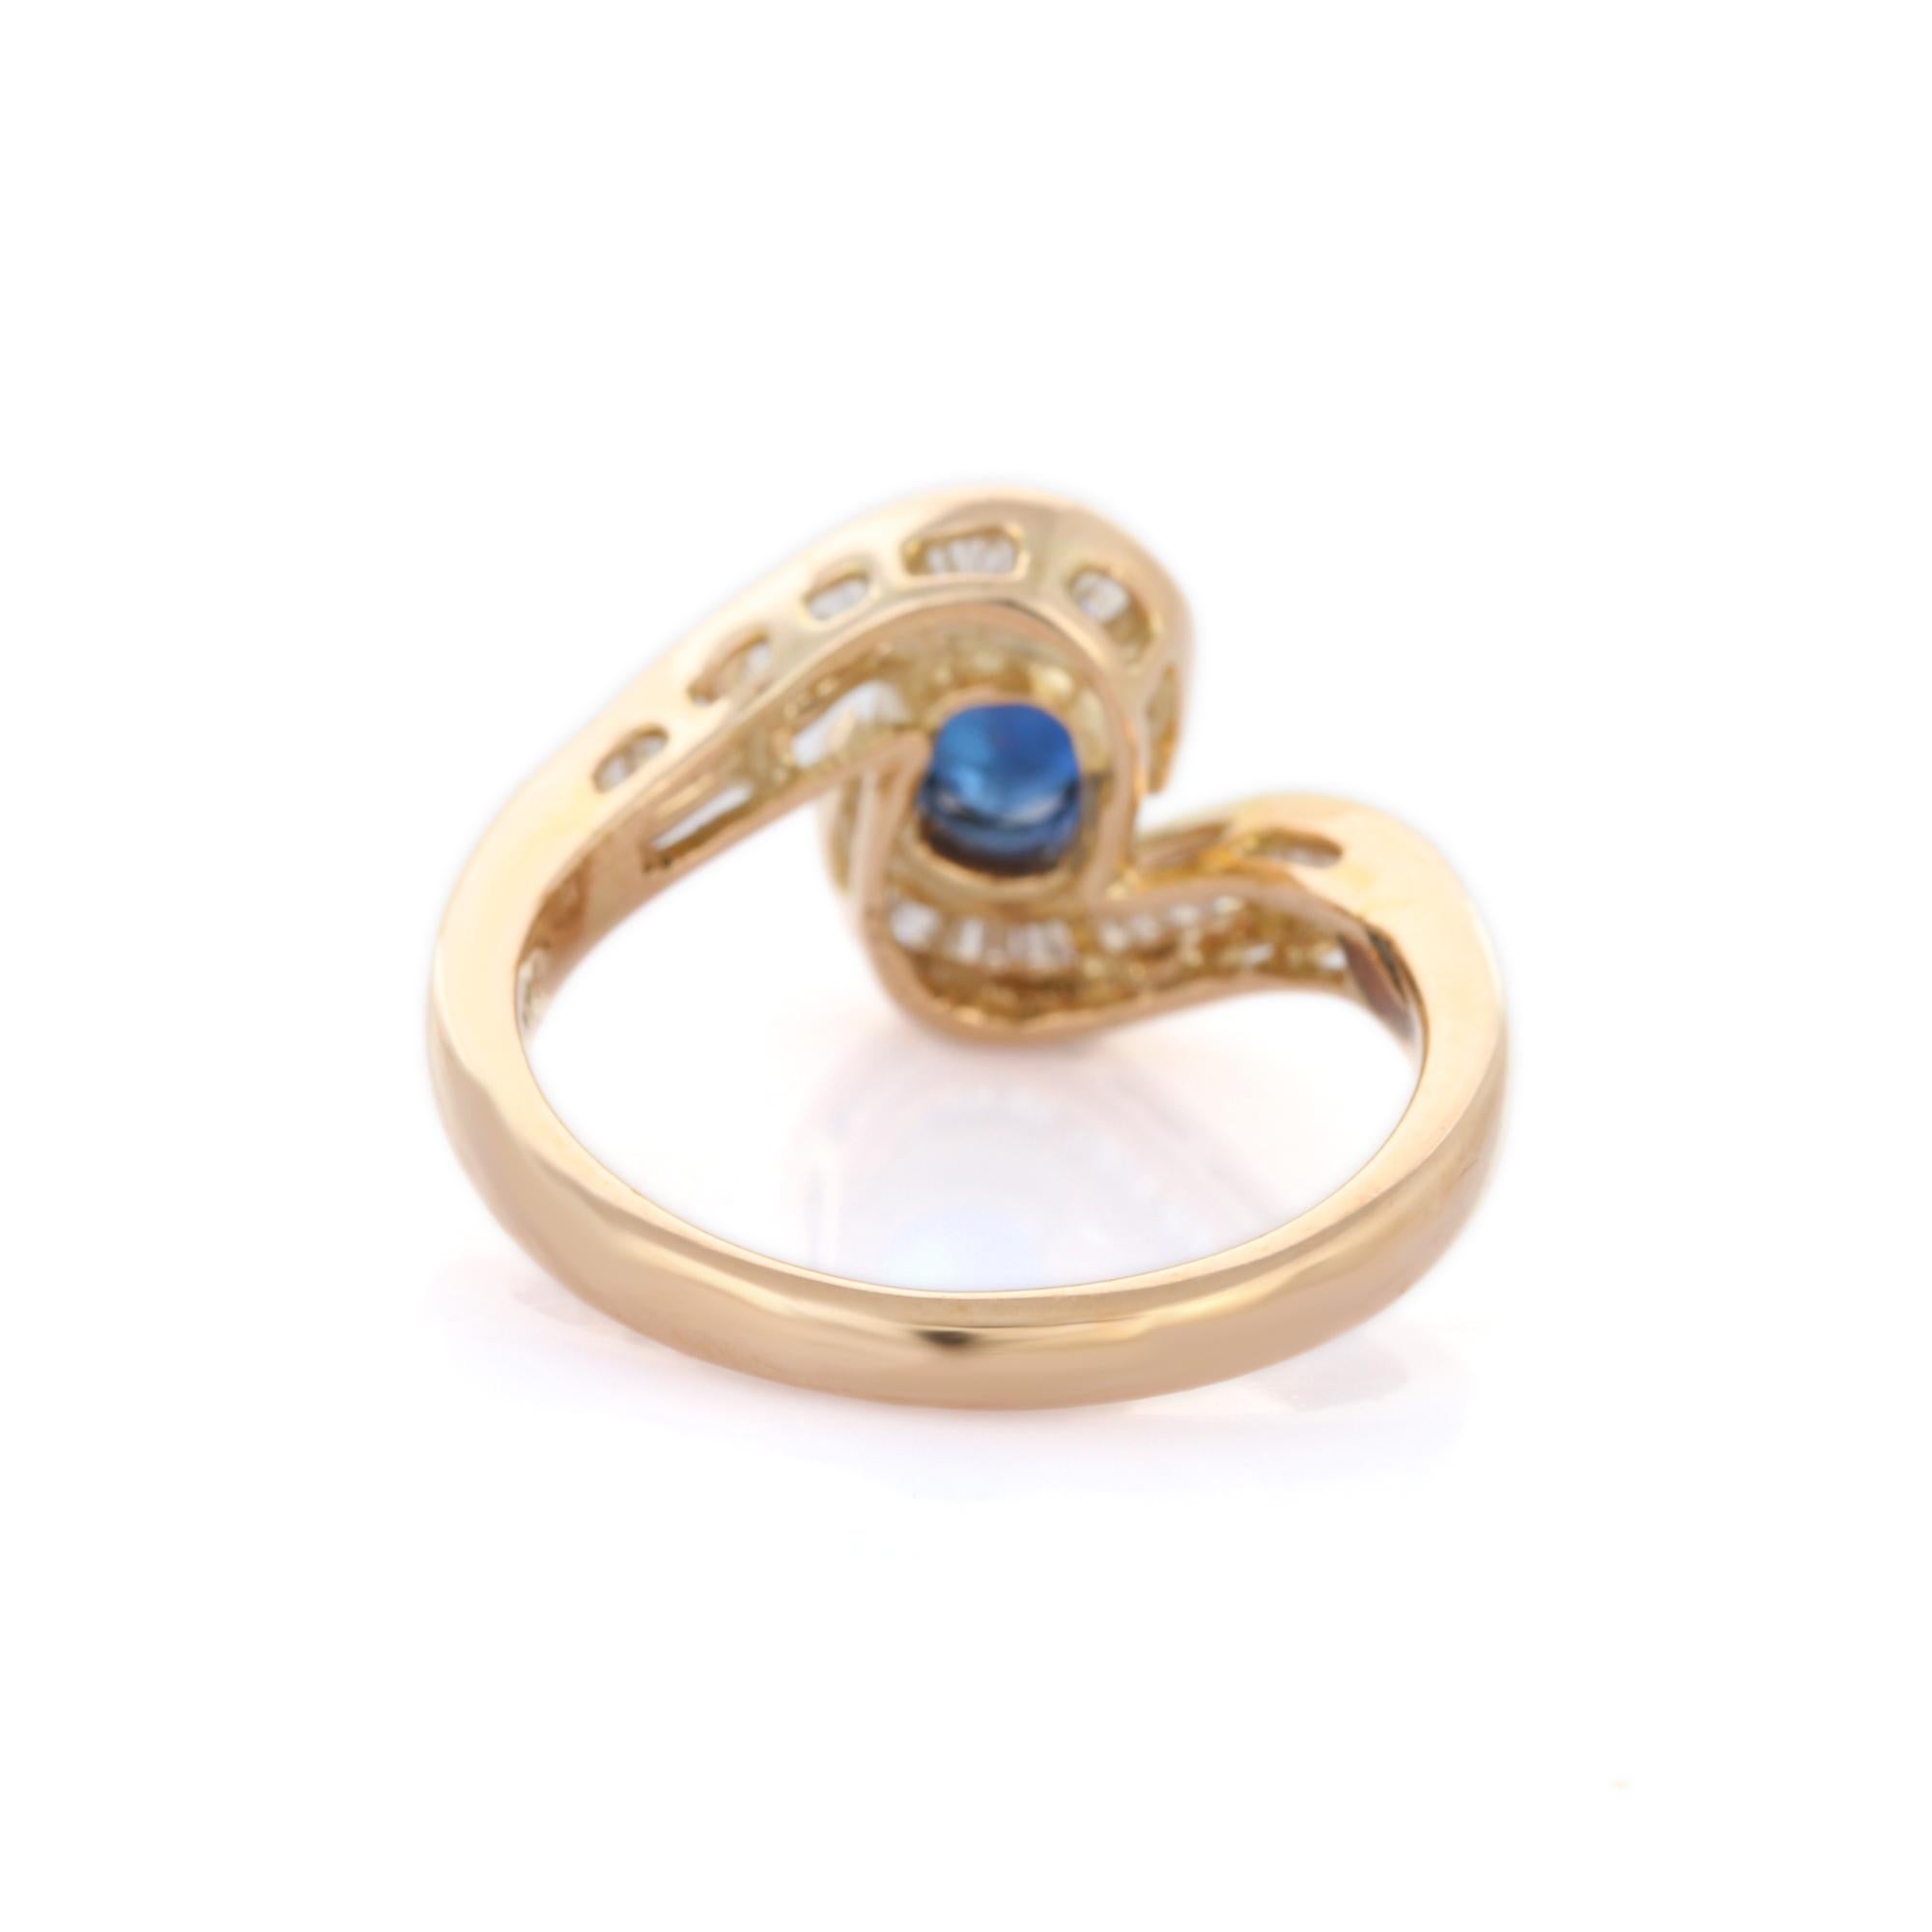 For Sale:  Diamond and Blue Sapphire Cross Shank Ring in 14k Solid Yellow Gold 3